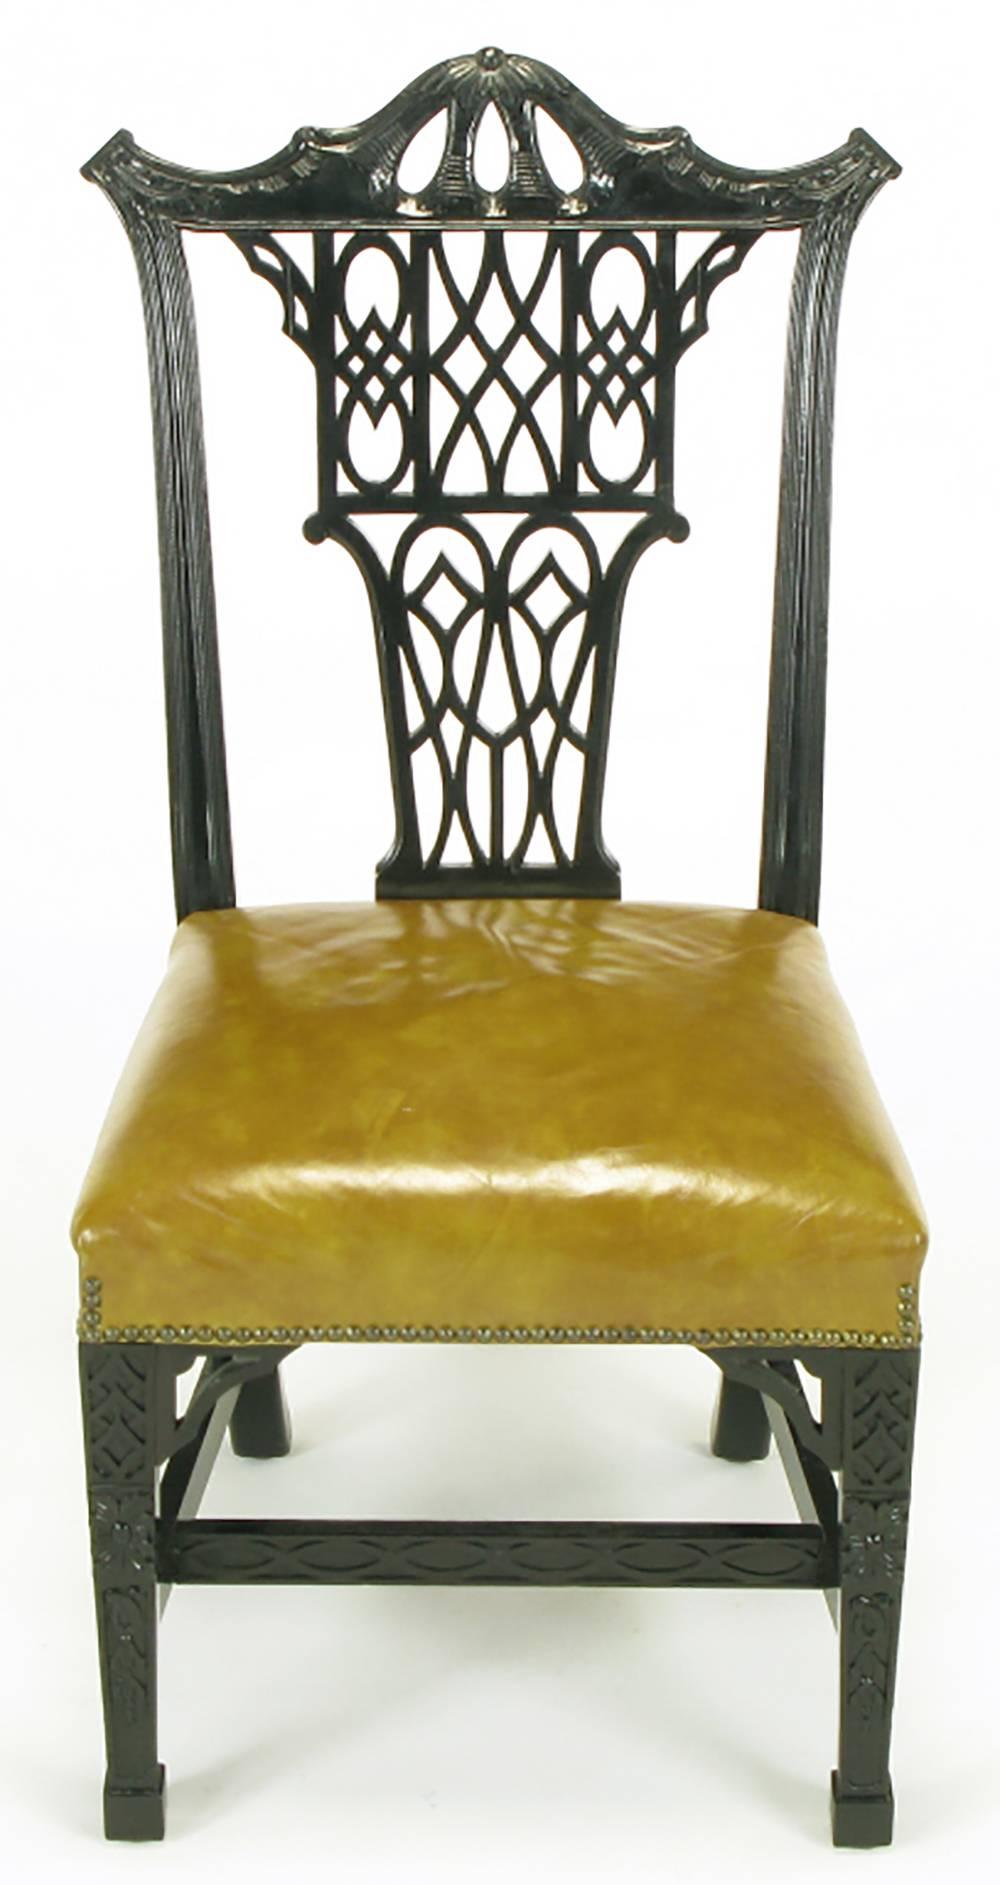 Set of eight early century chair company transitional dining chairs. Influenced by George III and Chinese Chippendale styles with straight front legs with closed fretwork and carved panels to the side and center stretchers. Sienna toned leather.